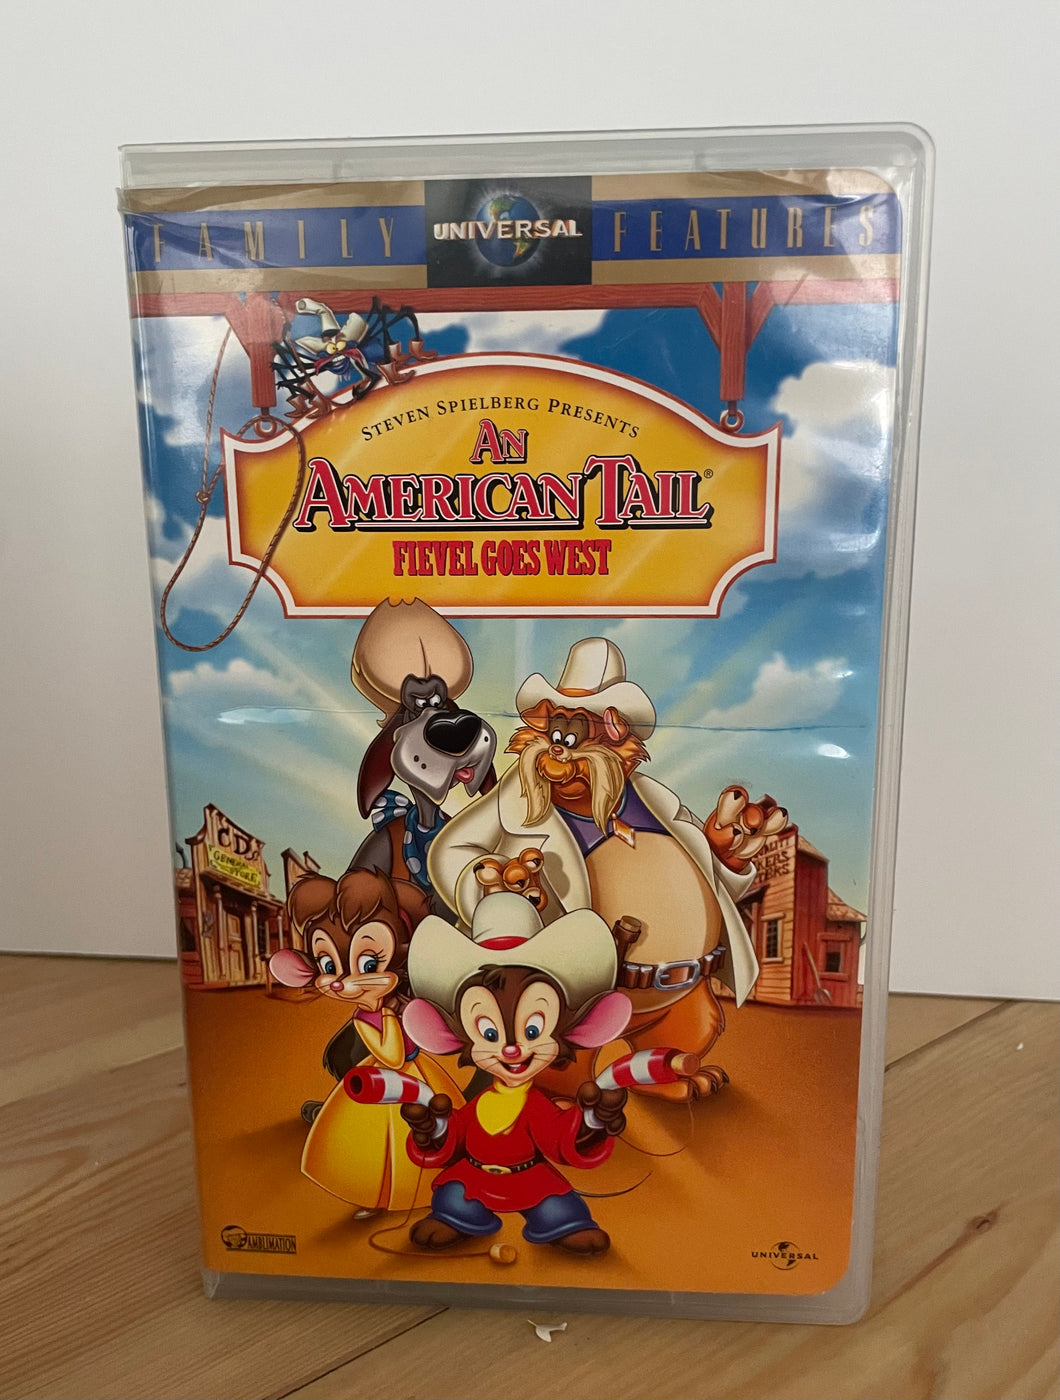 Vintage Universal 1992 “An American Tail: Fievel Goes West” VHS